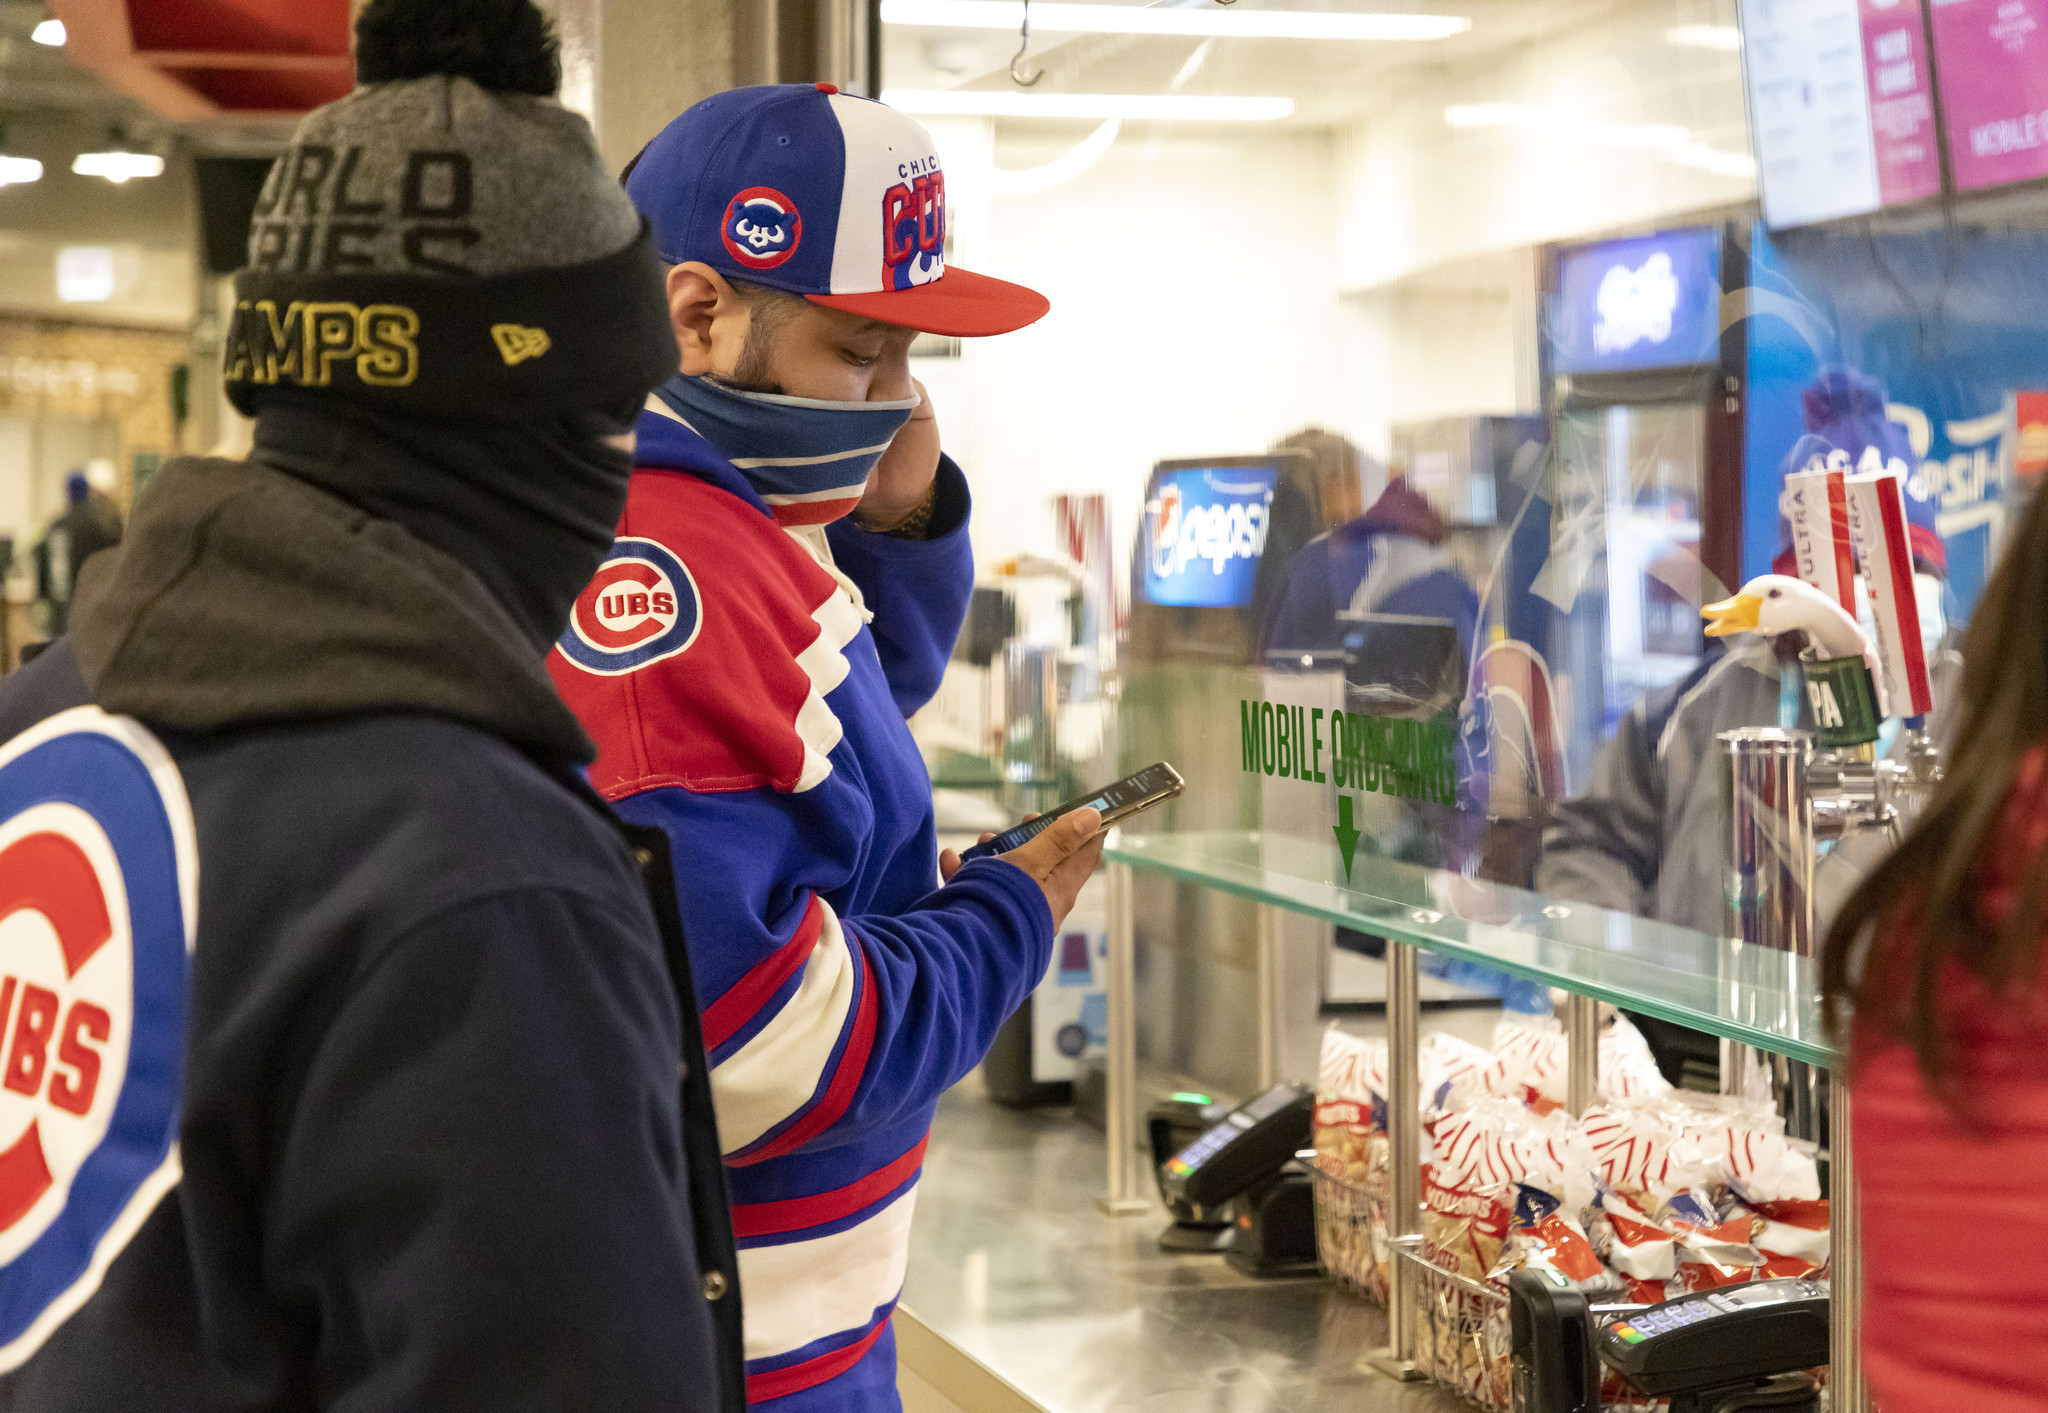 At Wrigley Field, online food ordering clashes with stubborn ballpark conventions and traditions